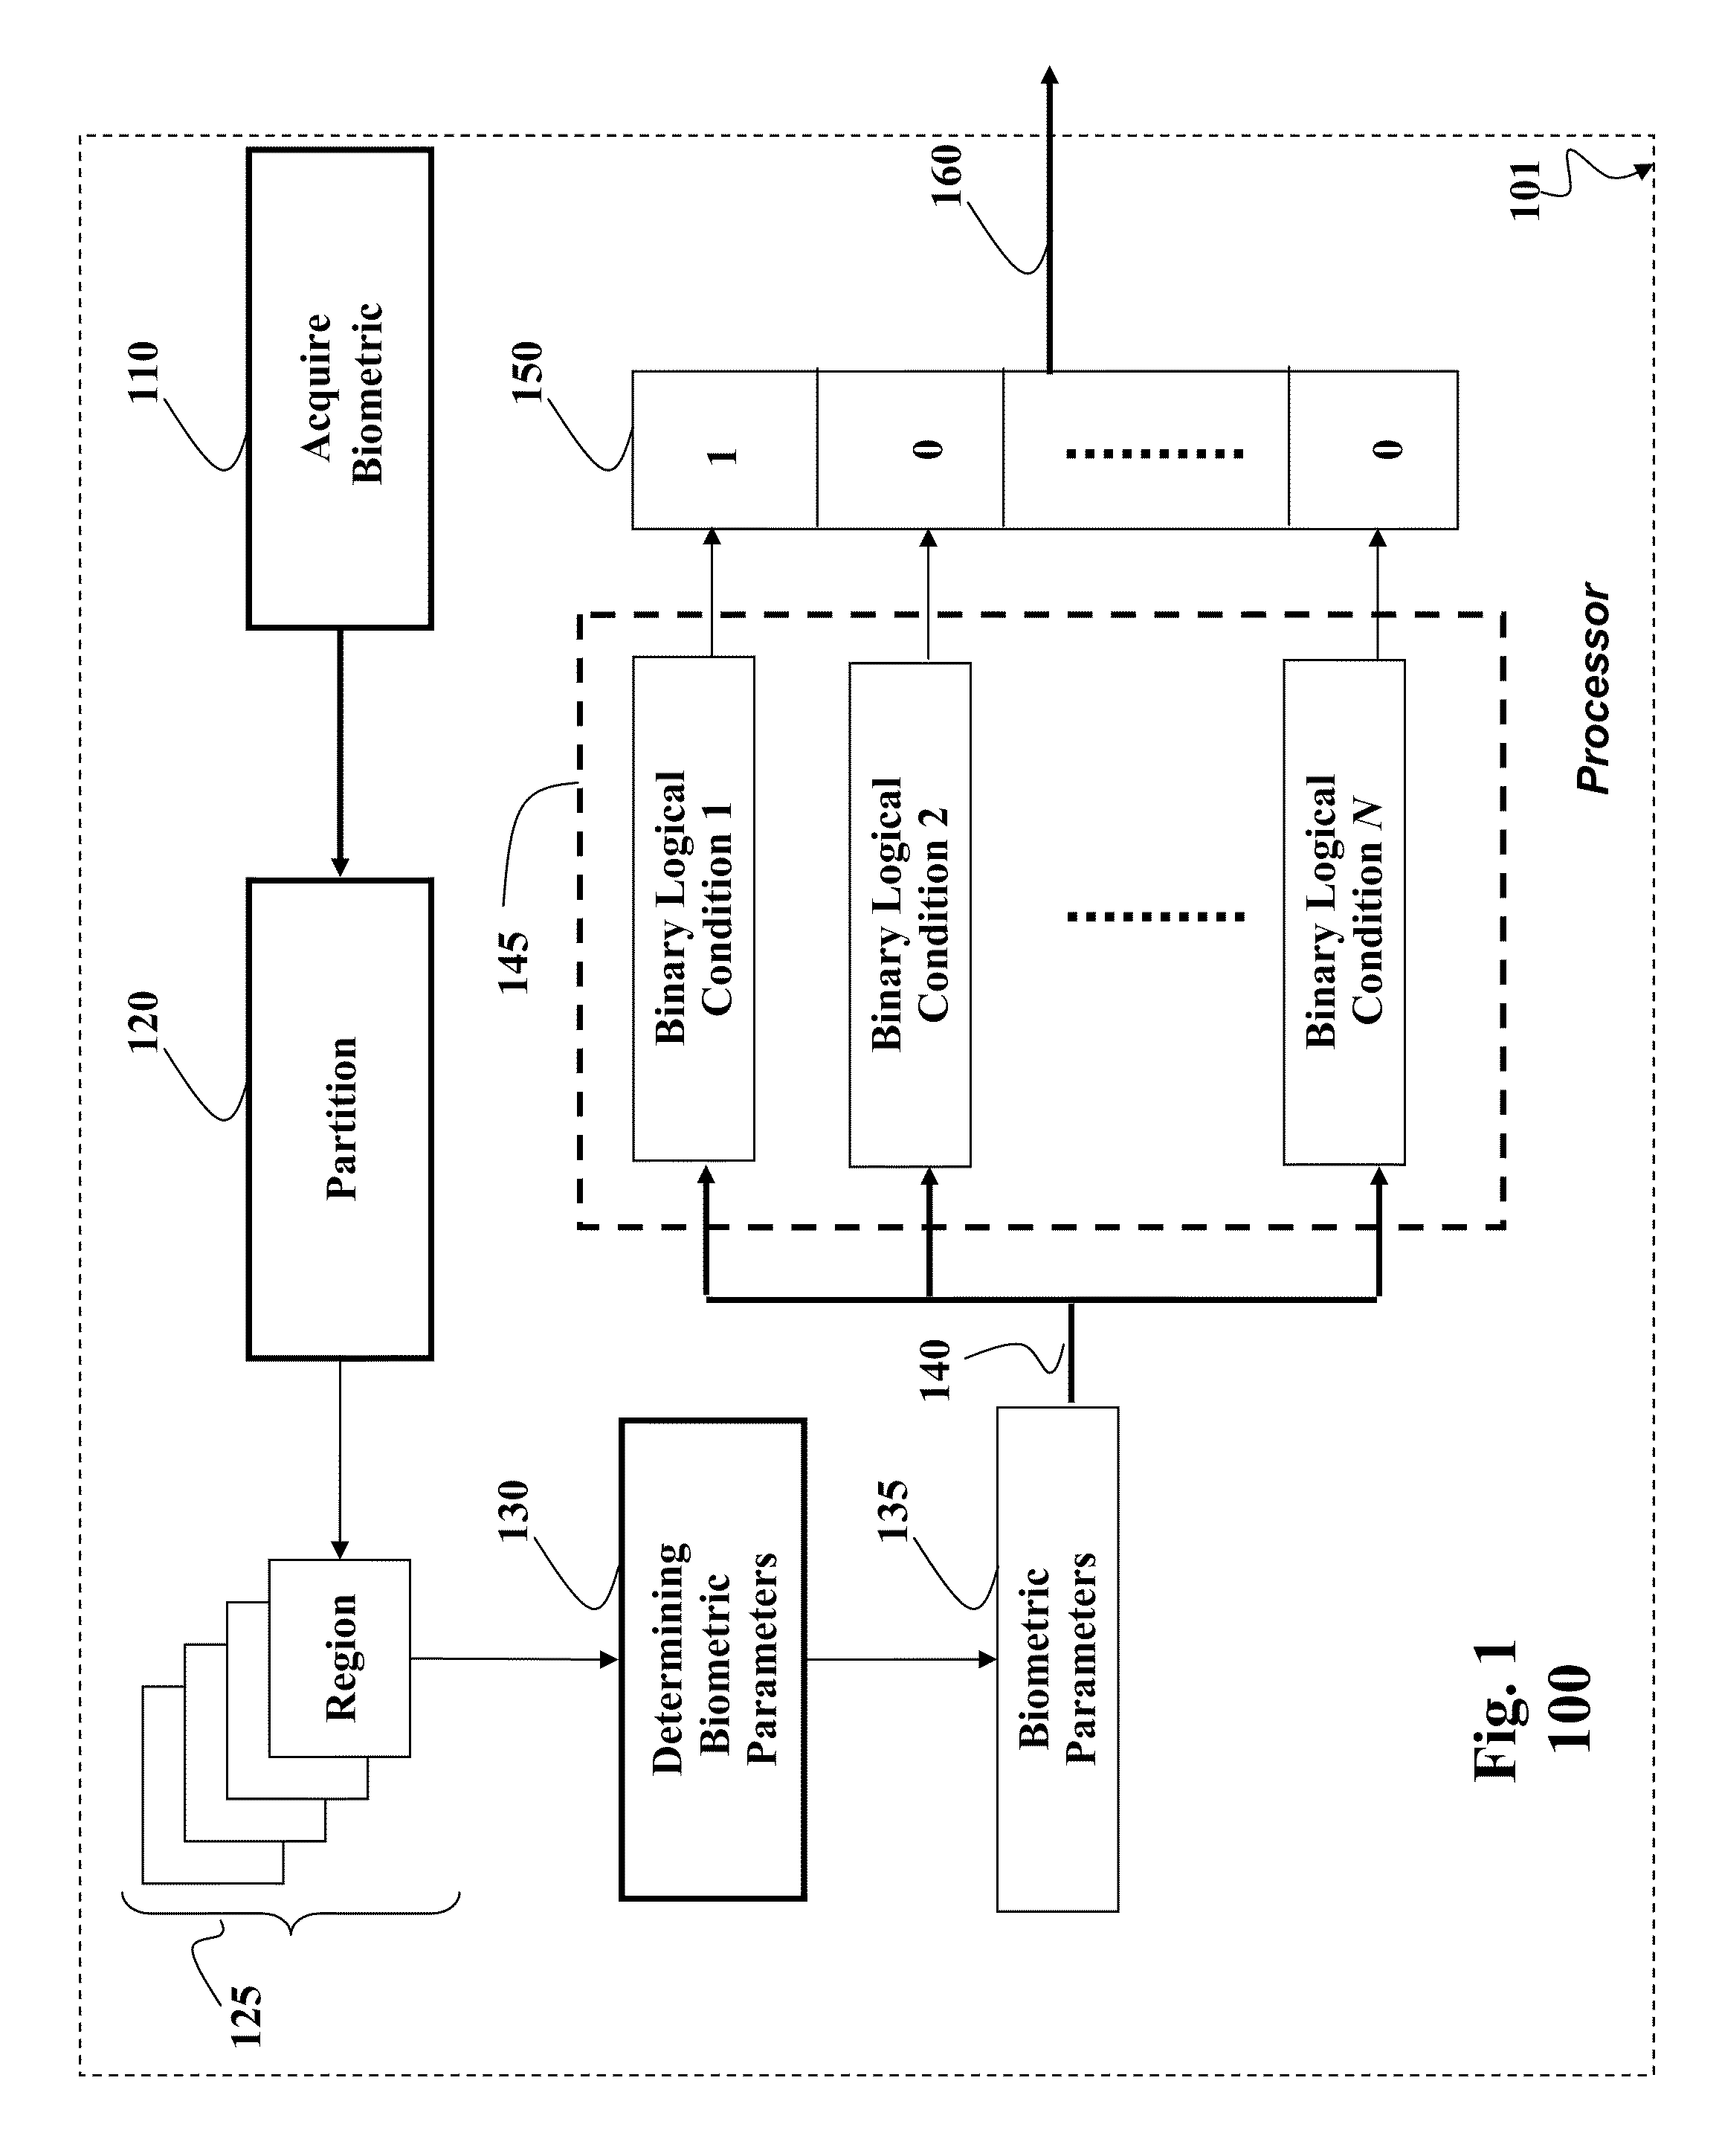 Method and System for Binarization of Biometric Data